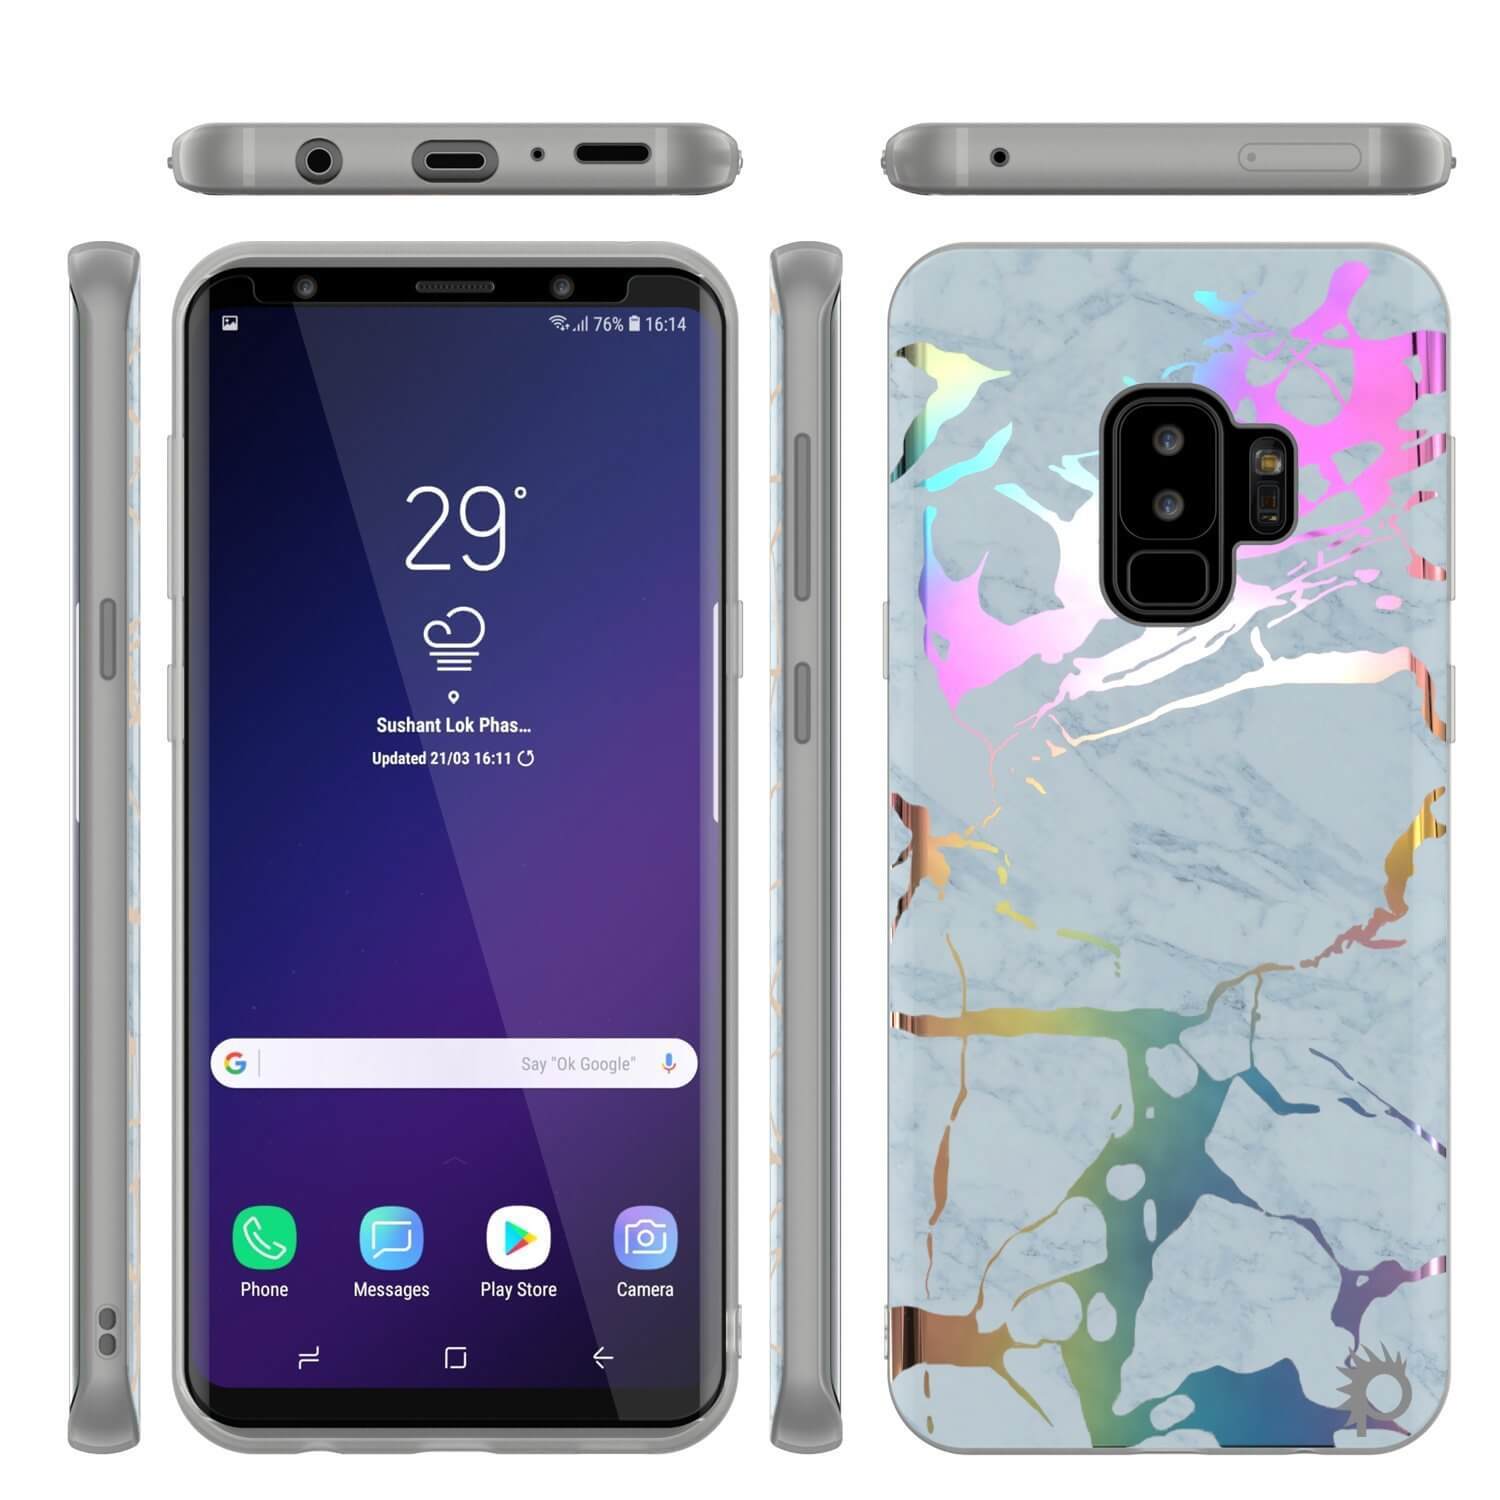 Punkcase Galaxy S9+ Protective Full Body Marble Case | Blue Marmo